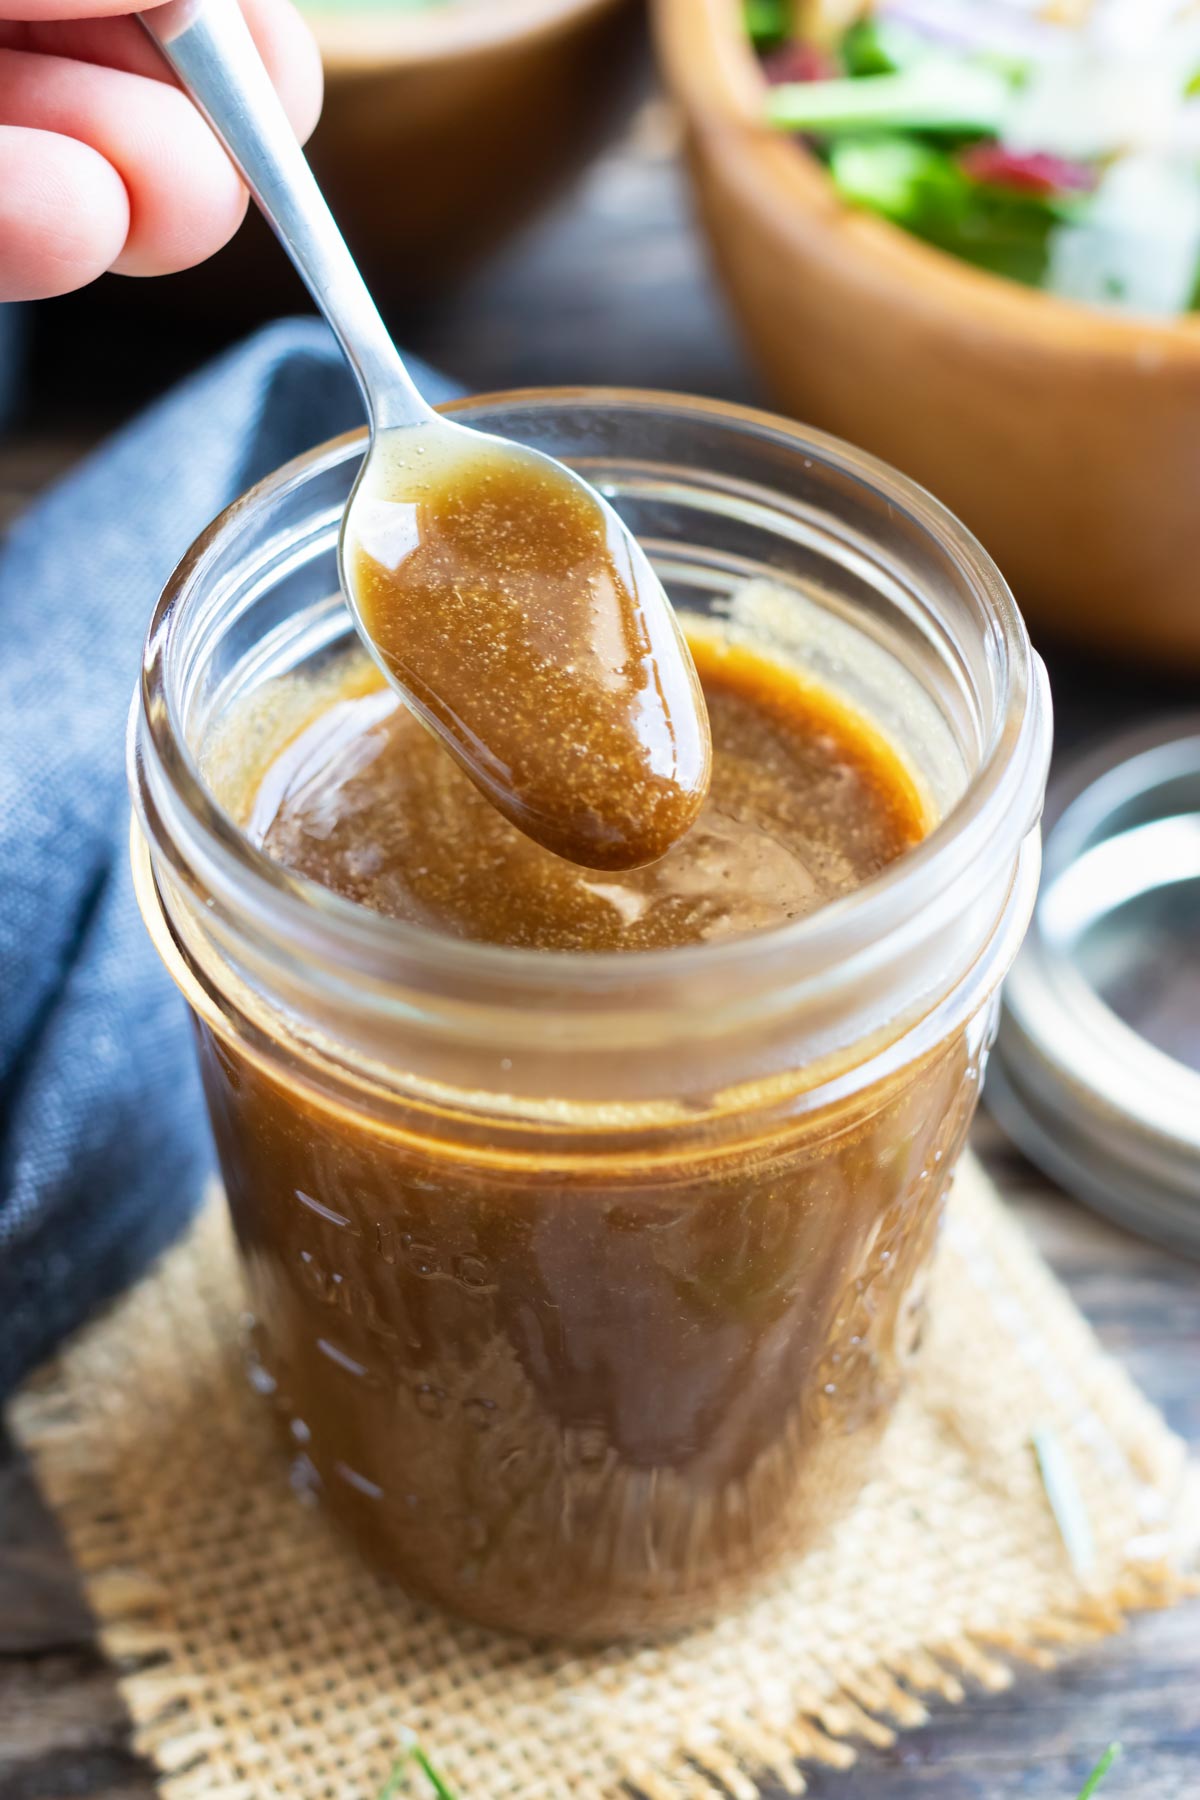 Healthy Balsamic Vinaigrette Dressing RECIPE served in a Mason jar with a spoon.